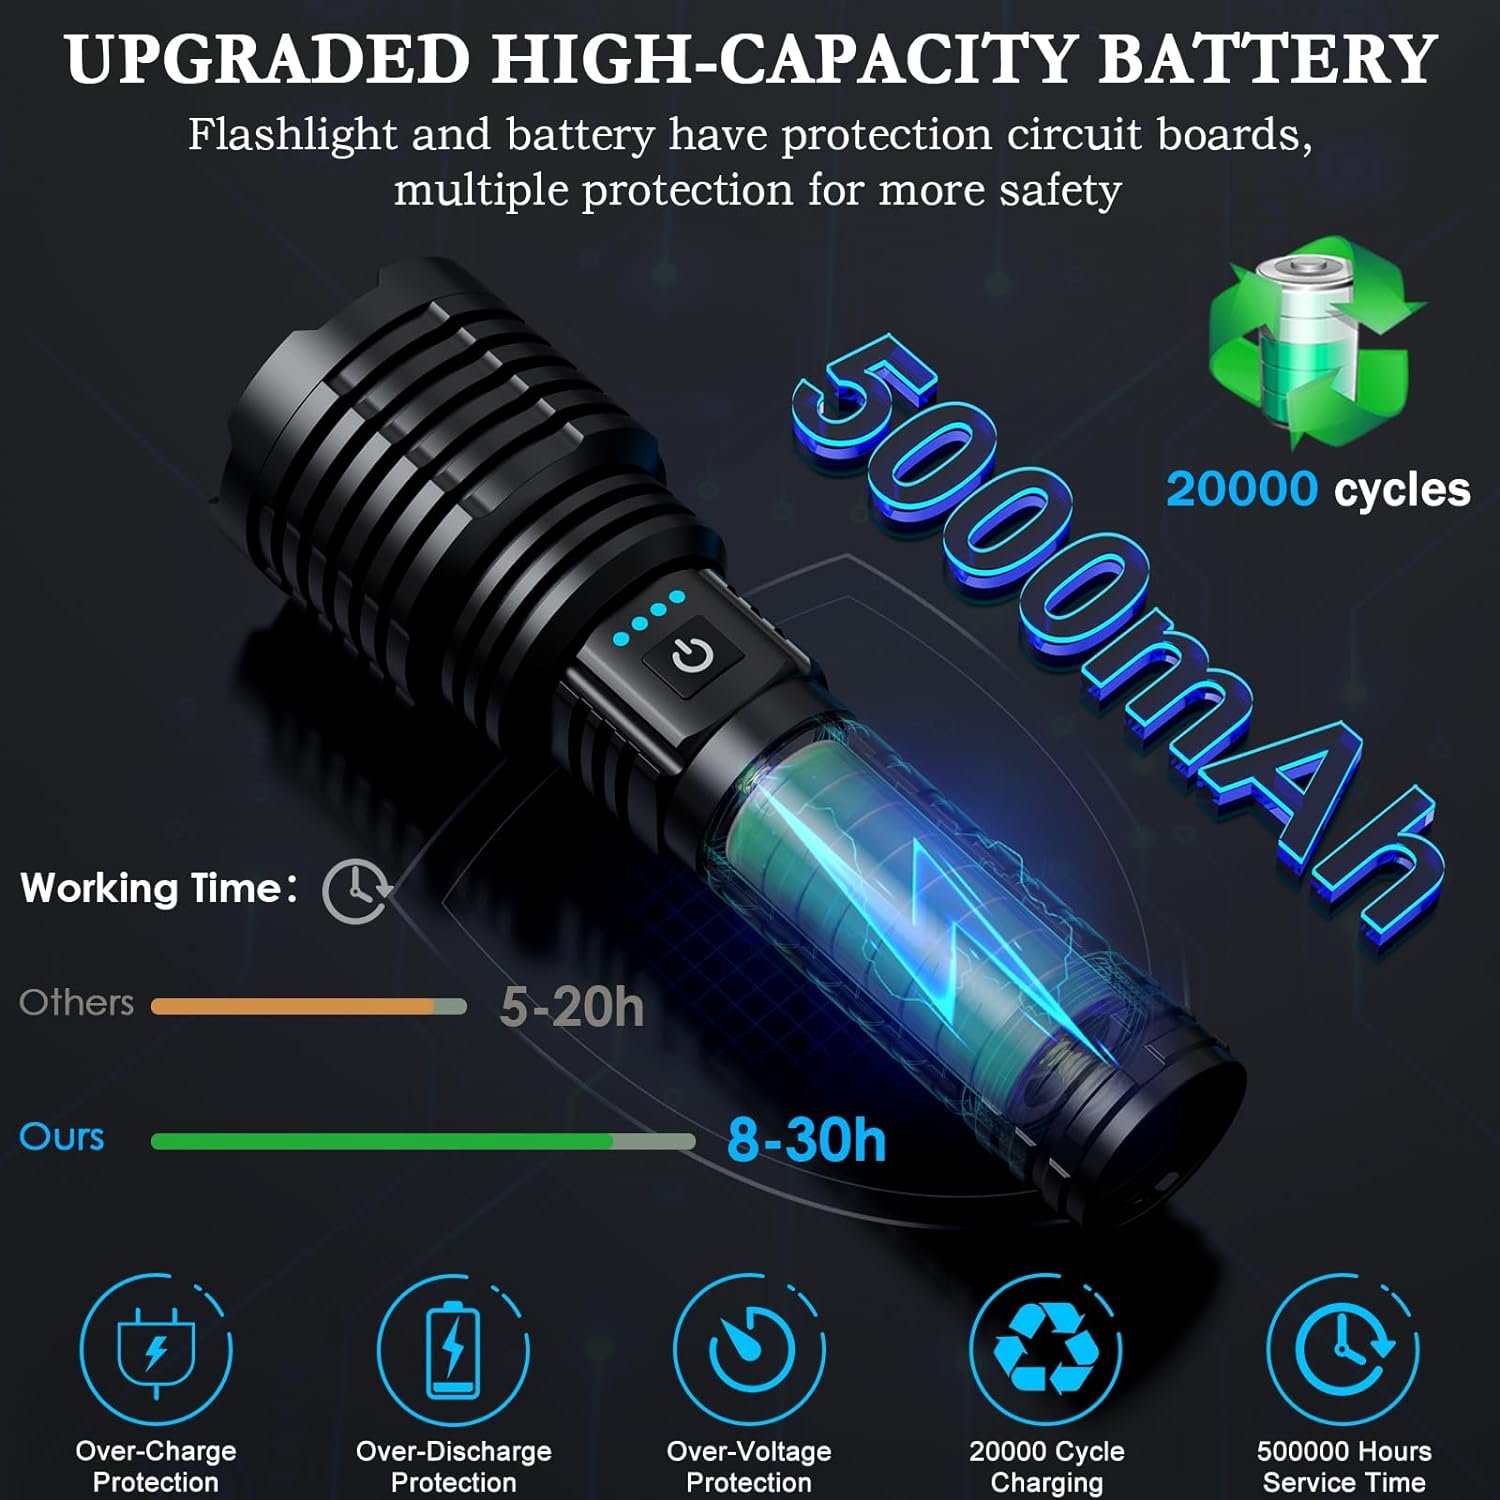 Super Bright LED Flashlight 300000 High Lumens, Rechargeable Handheld Flashlights Powered by Battery, Powerful Waterproof Tactical Flashlights with Zoomable 6 Modes for Emergencies Camping (Black)